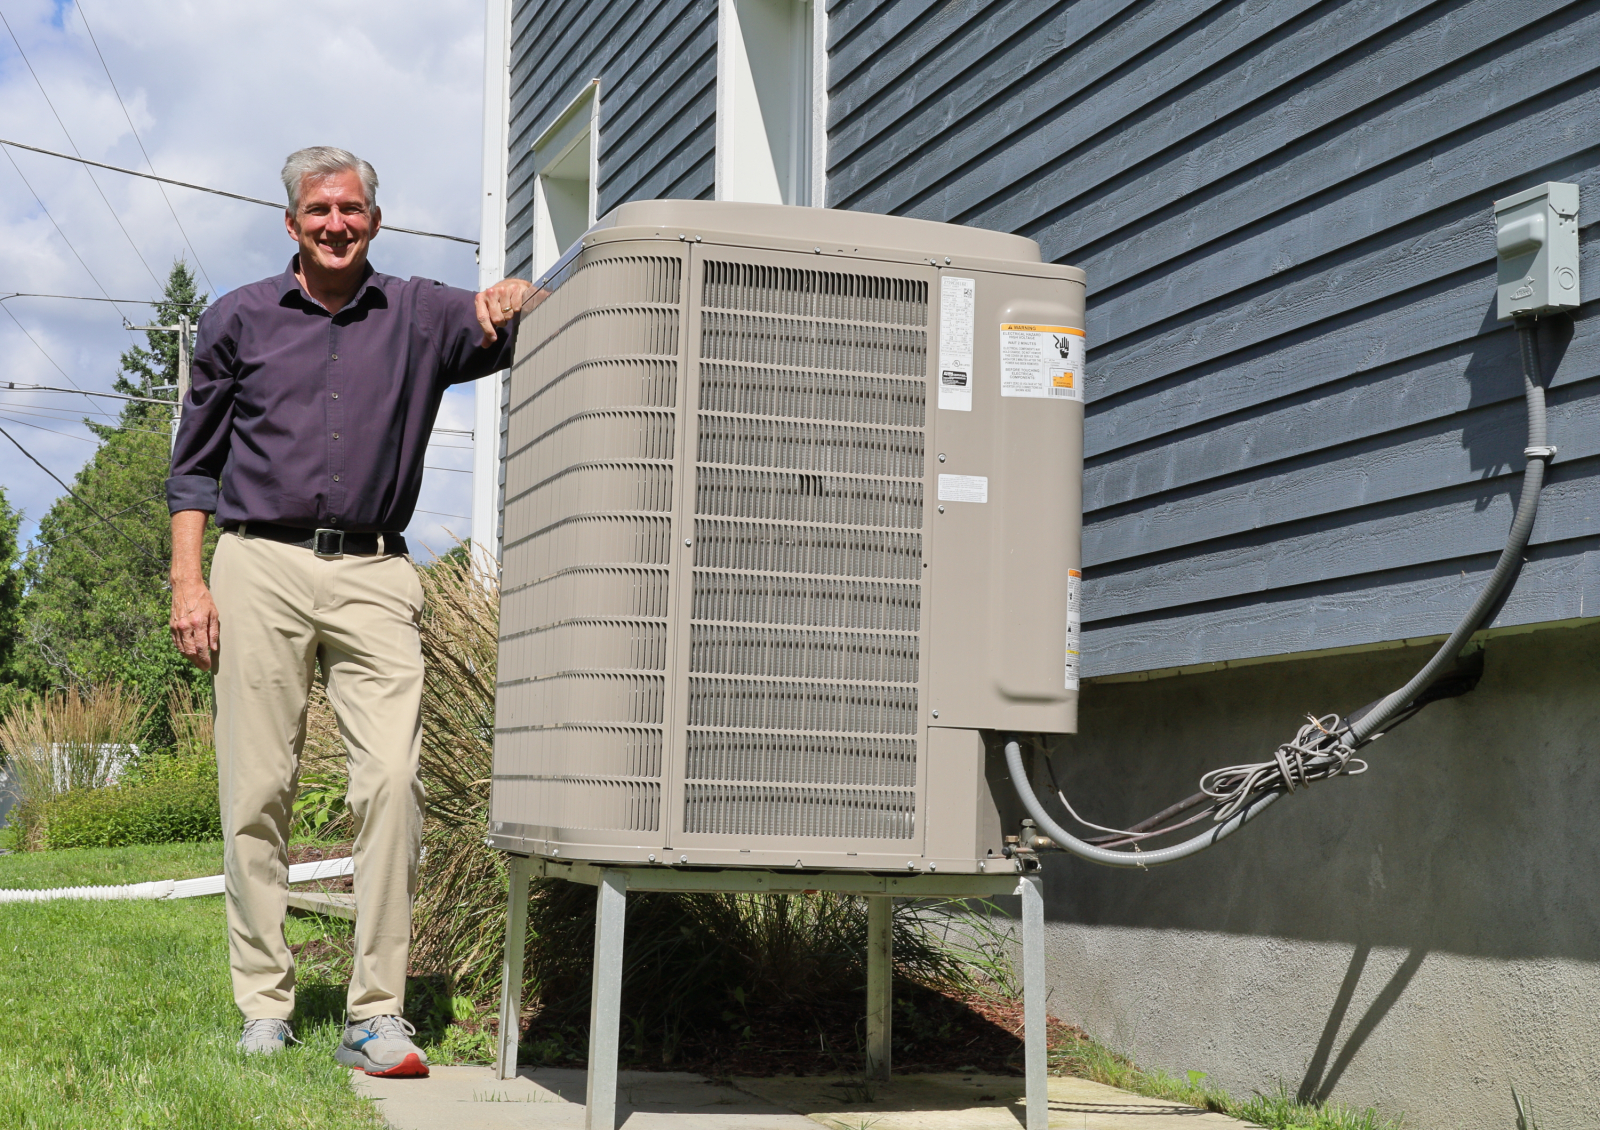 A man standing with his arm on an air source heat pump outside his blue house